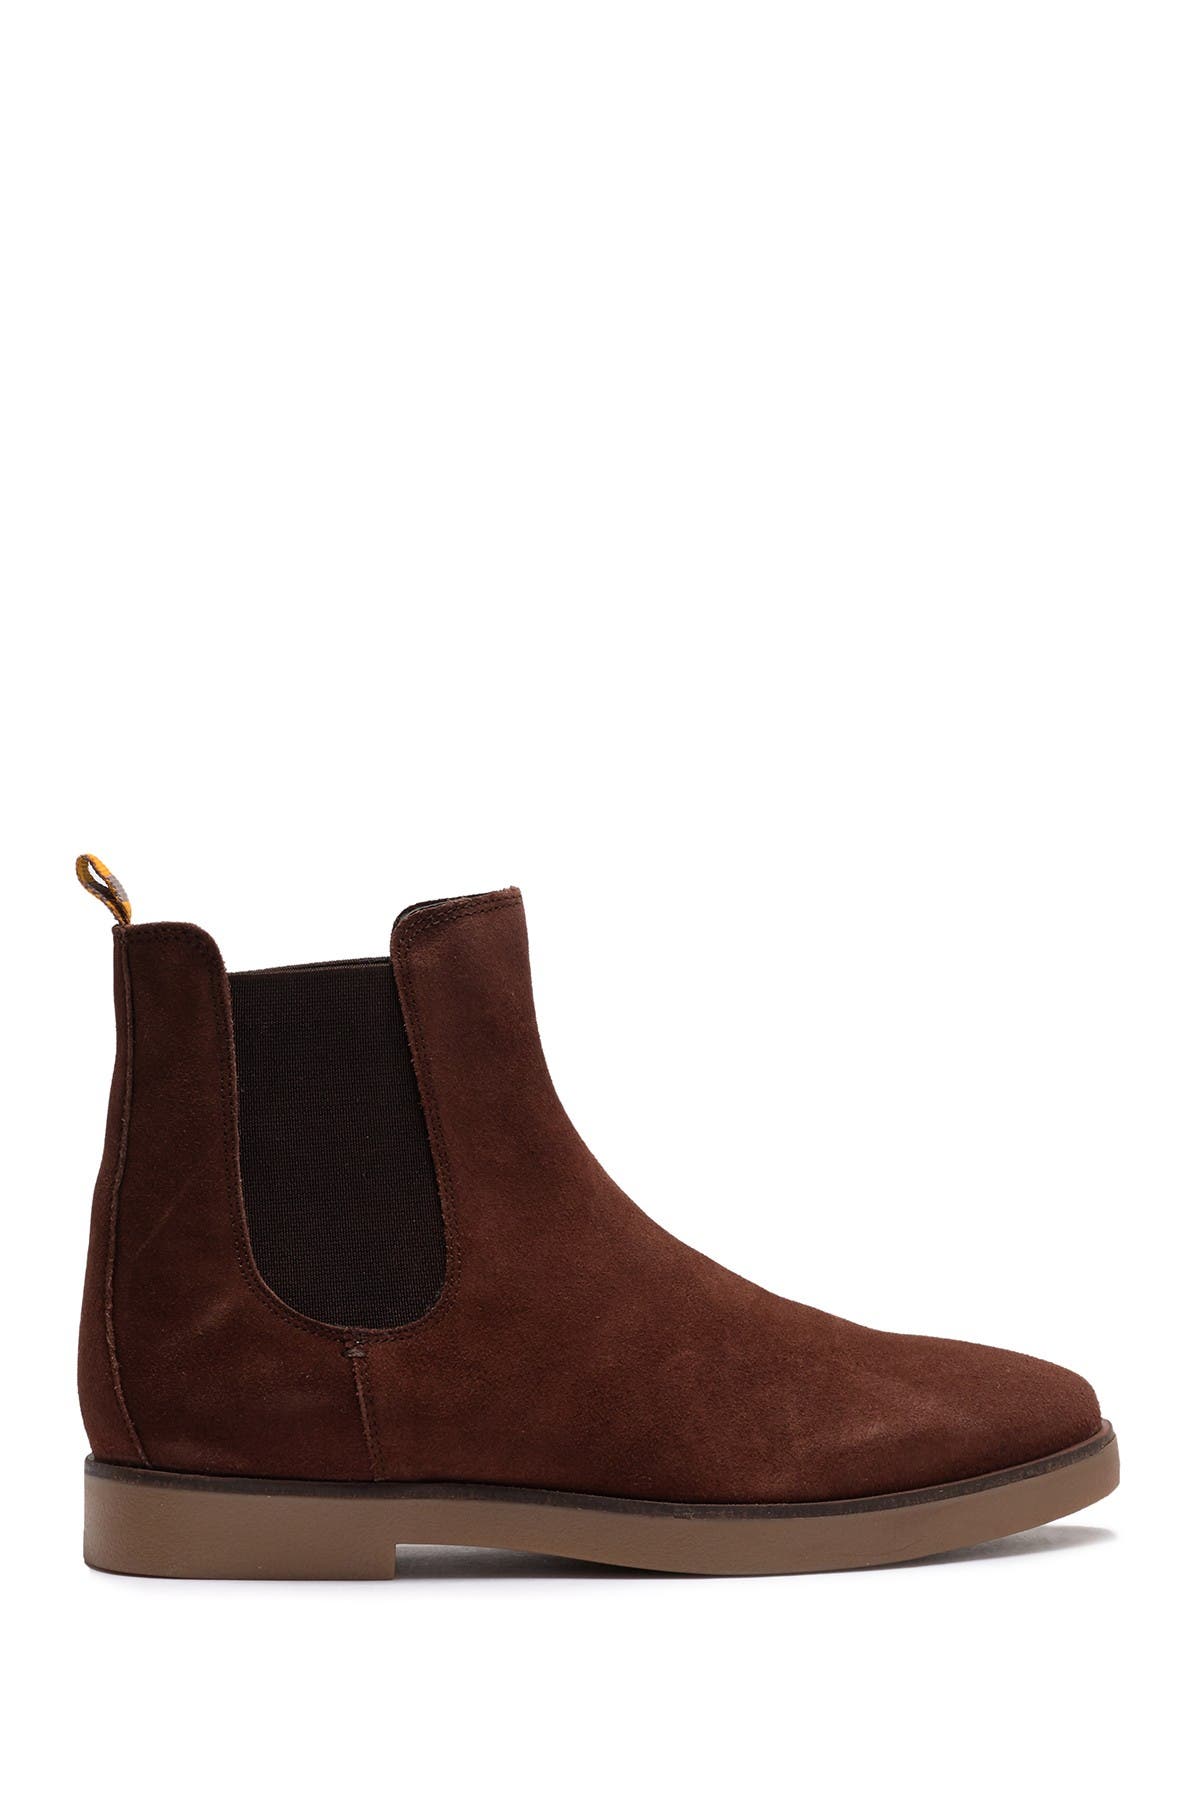 frank wright dutch suede chelsea boot